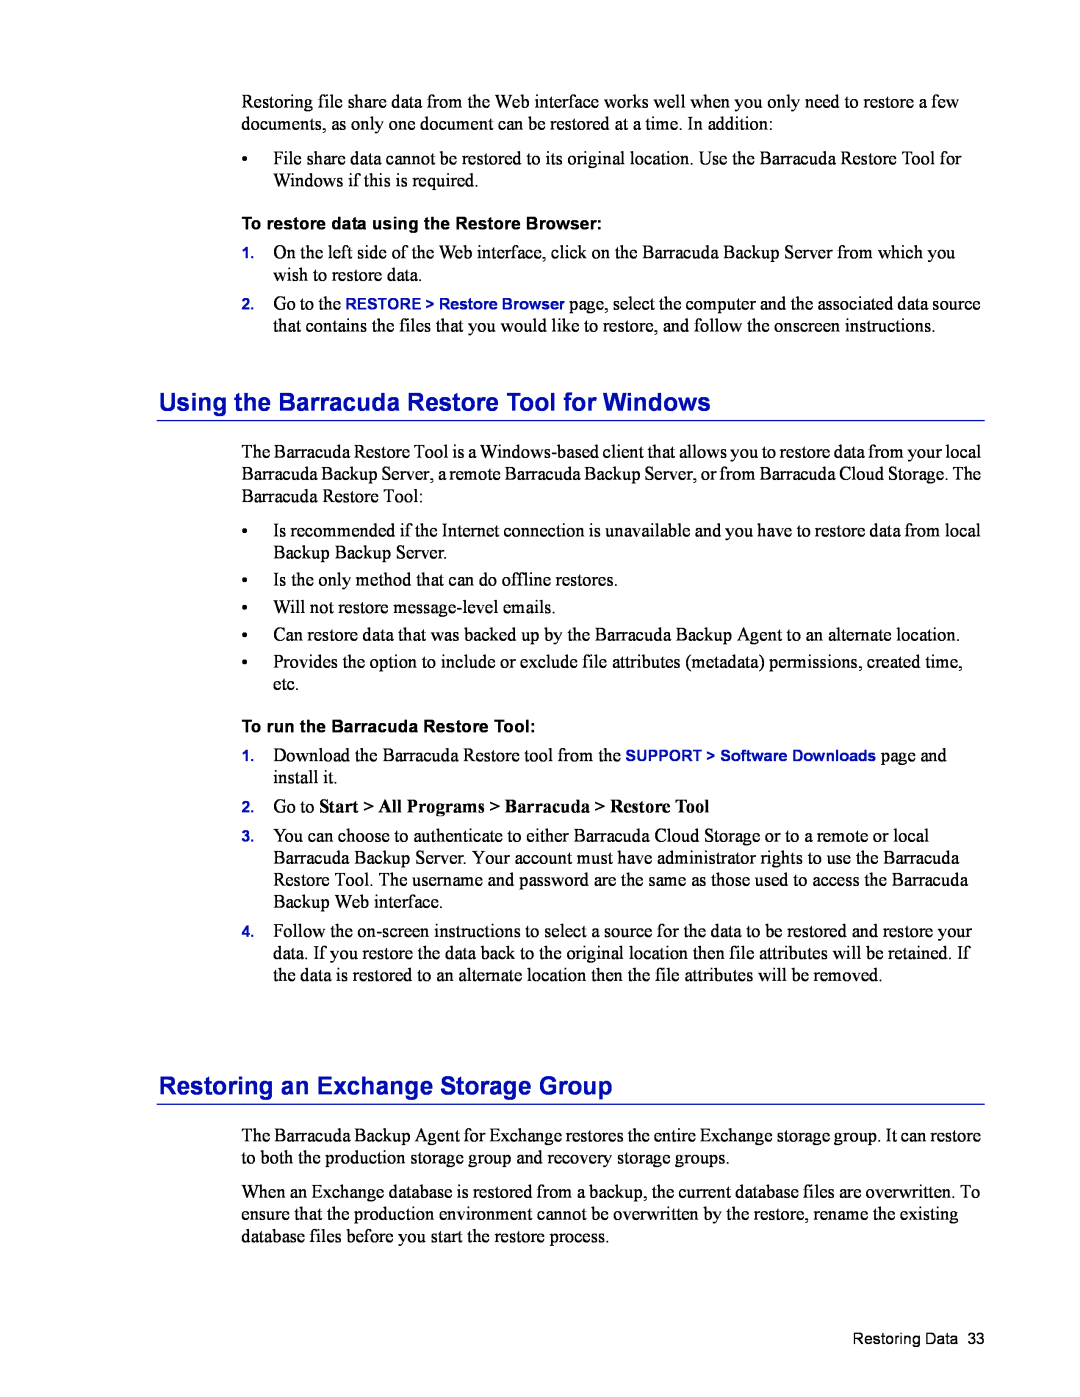 Barracuda Networks 4 manual Using the Barracuda Restore Tool for Windows, Restoring an Exchange Storage Group 